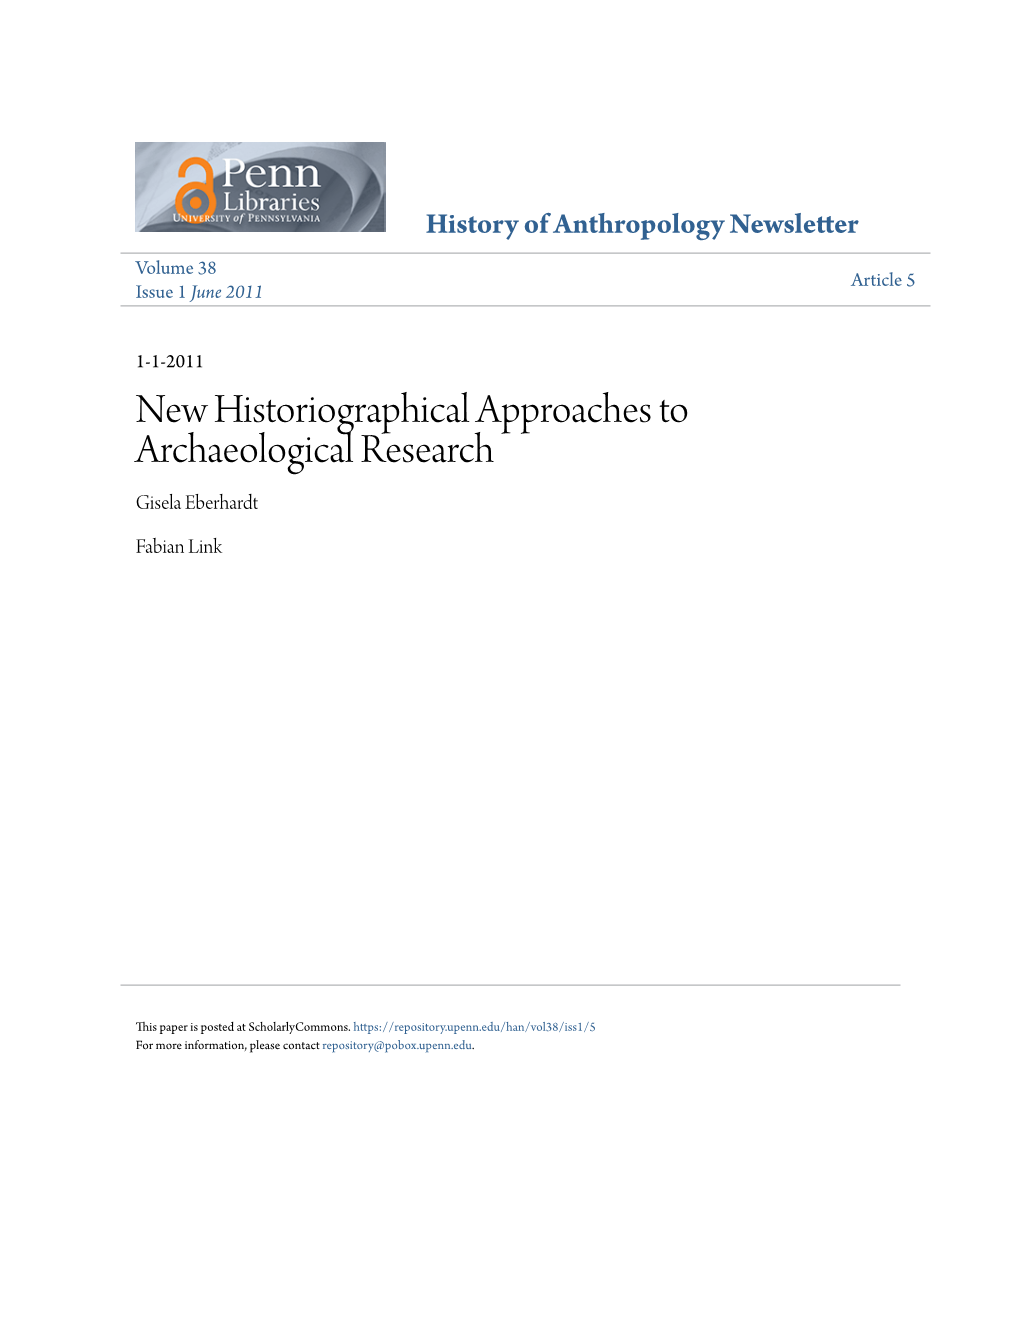 New Historiographical Approaches to Archaeological Research Gisela Eberhardt